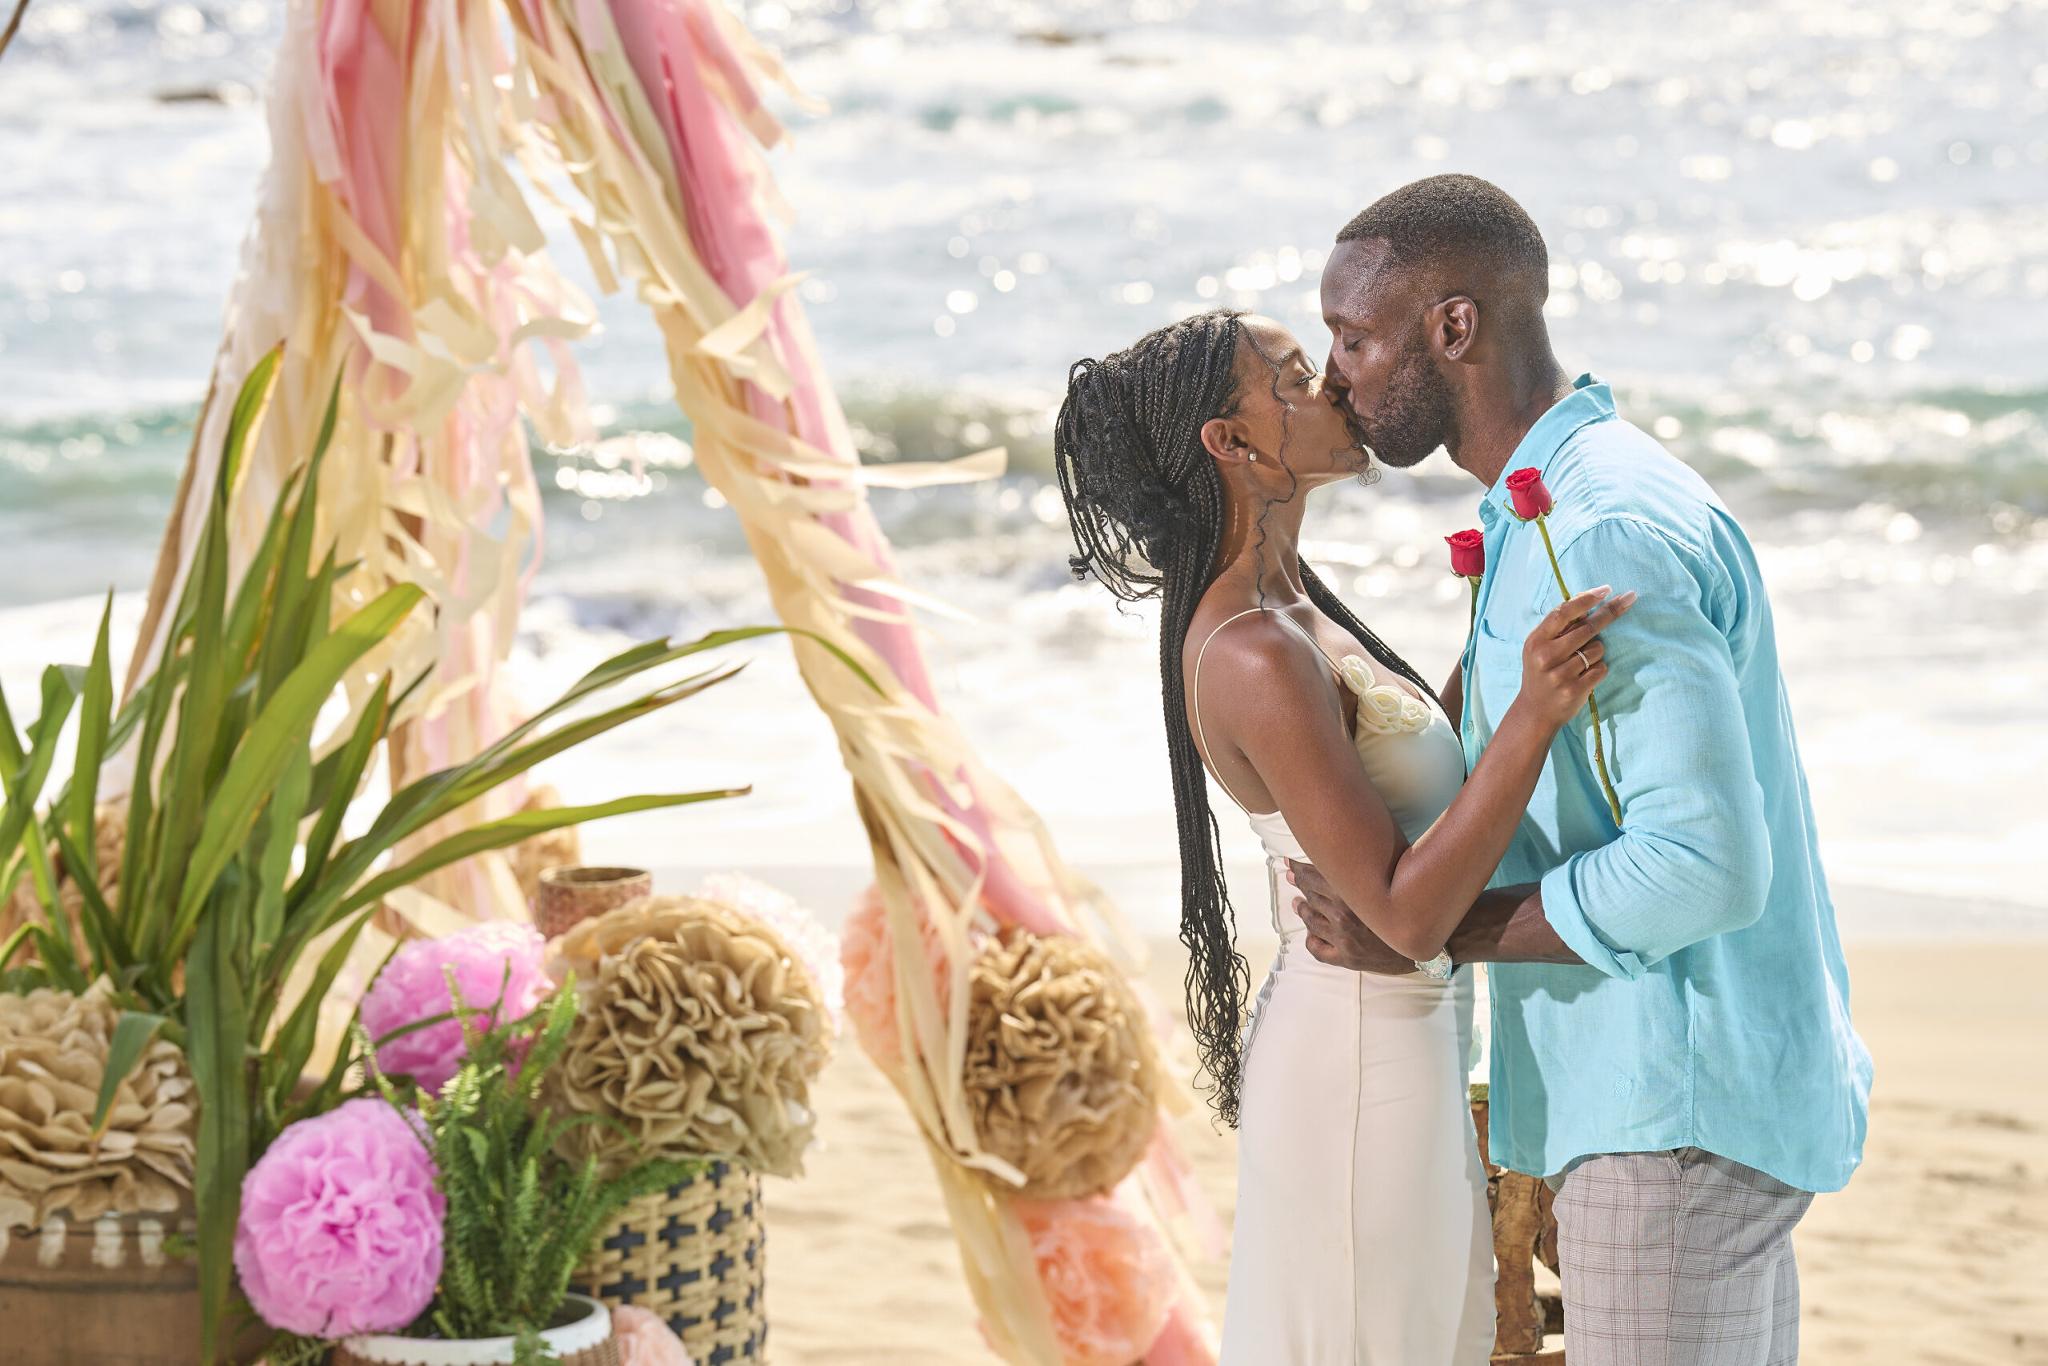 Eliza Isichei and her now-former boyfriend, Aaron Bryant, kissing each other